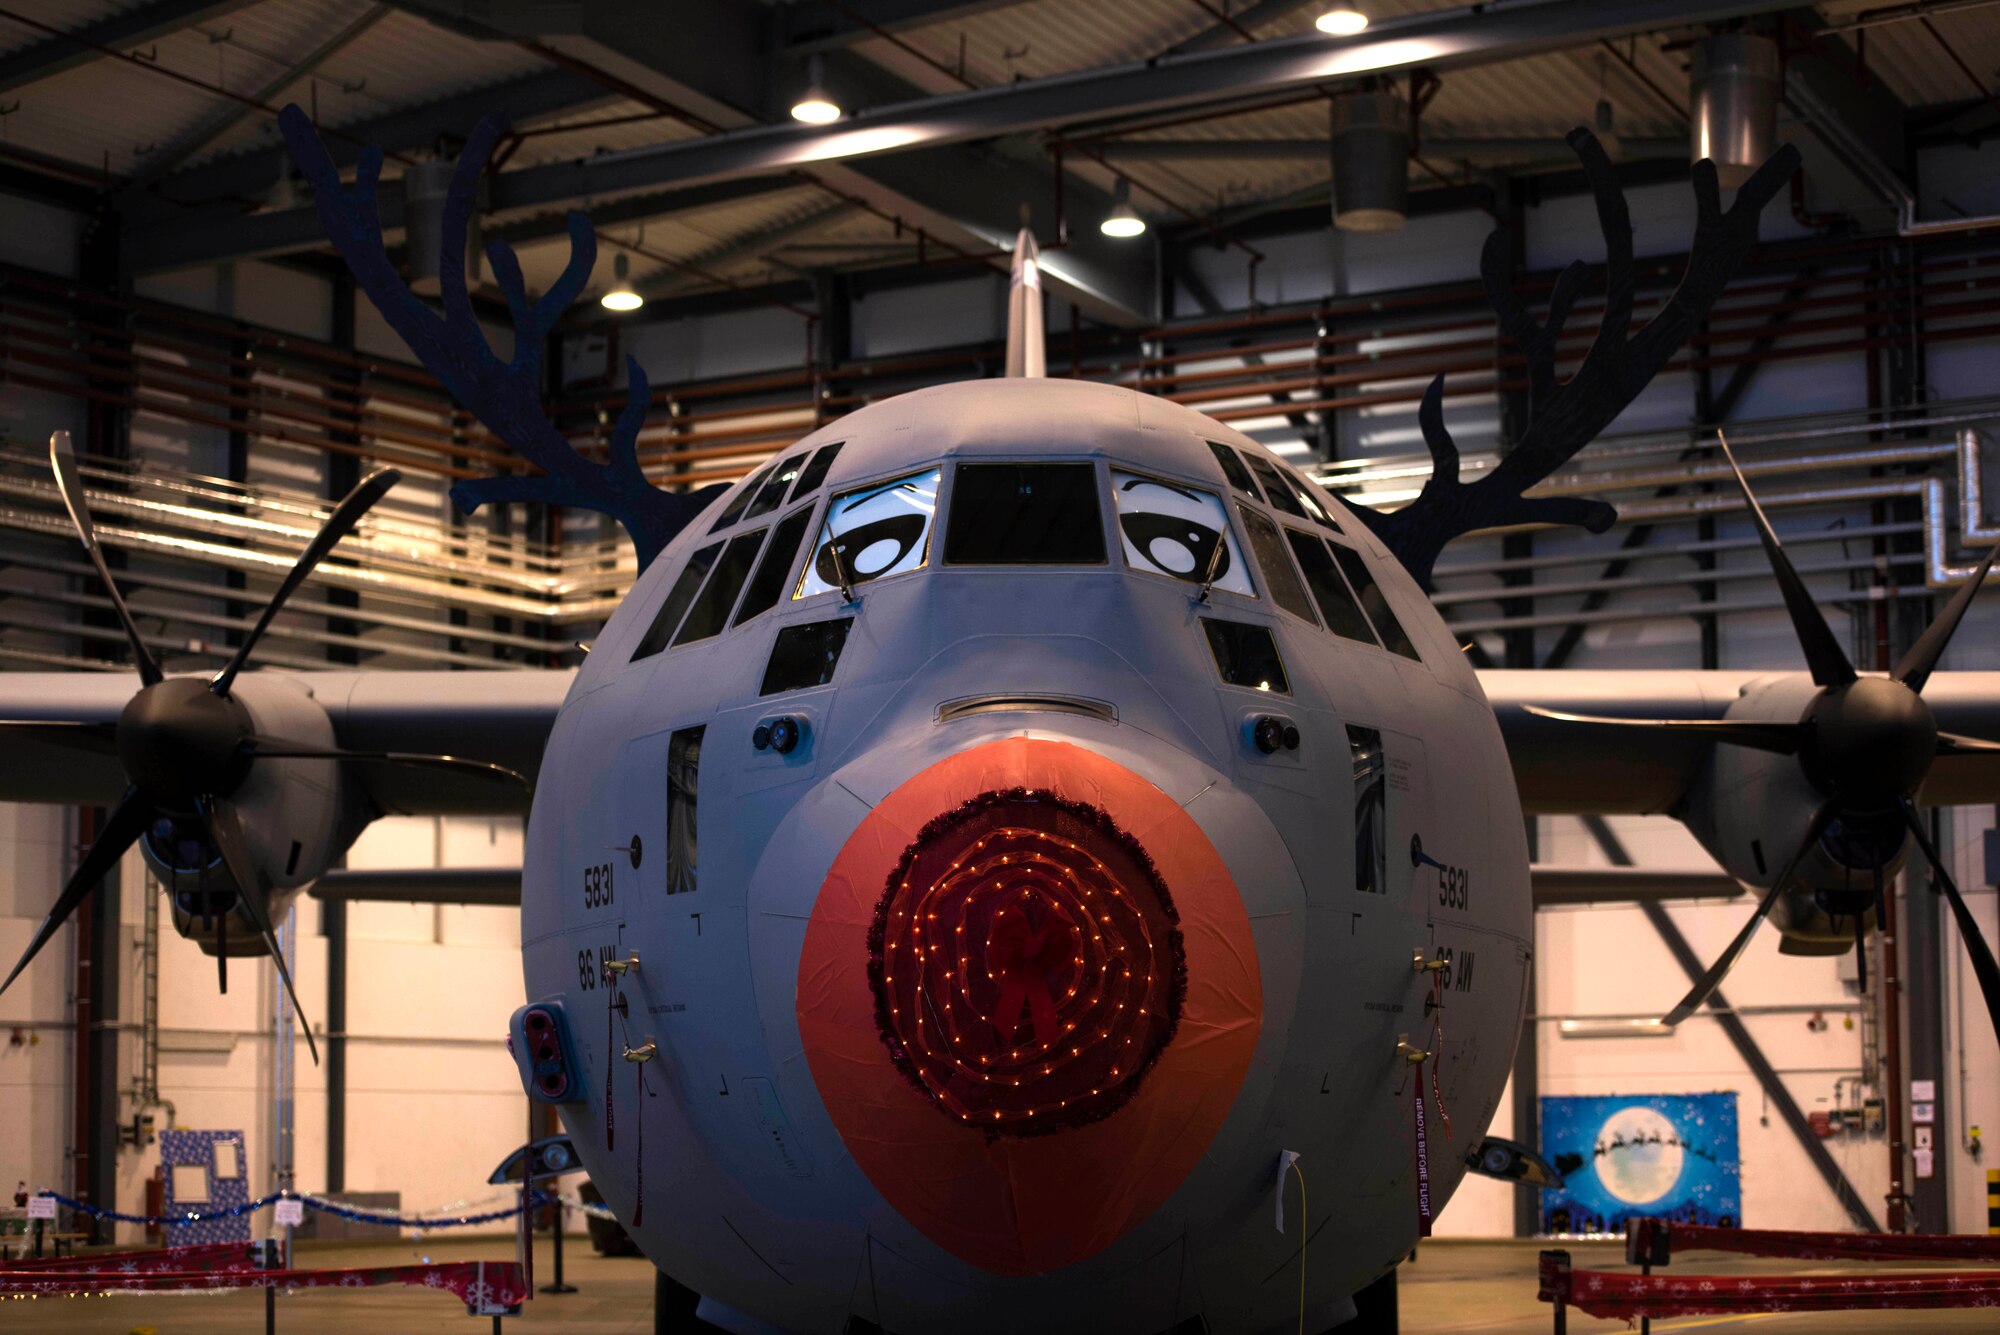 A U.S. Air Force C-130J Super Hercules, assigned to the 86th Airlift Wing, is decorated as Rudolph the Red Nosed Herc for an event, on Ramstein Air Base, Germany, Dec. 14, 2017. The 86th Maintenance Group hosted the event for families a part of the 86th AW. (U.S. Air Force photo by Senior Airman Devin M. Rumbaugh)